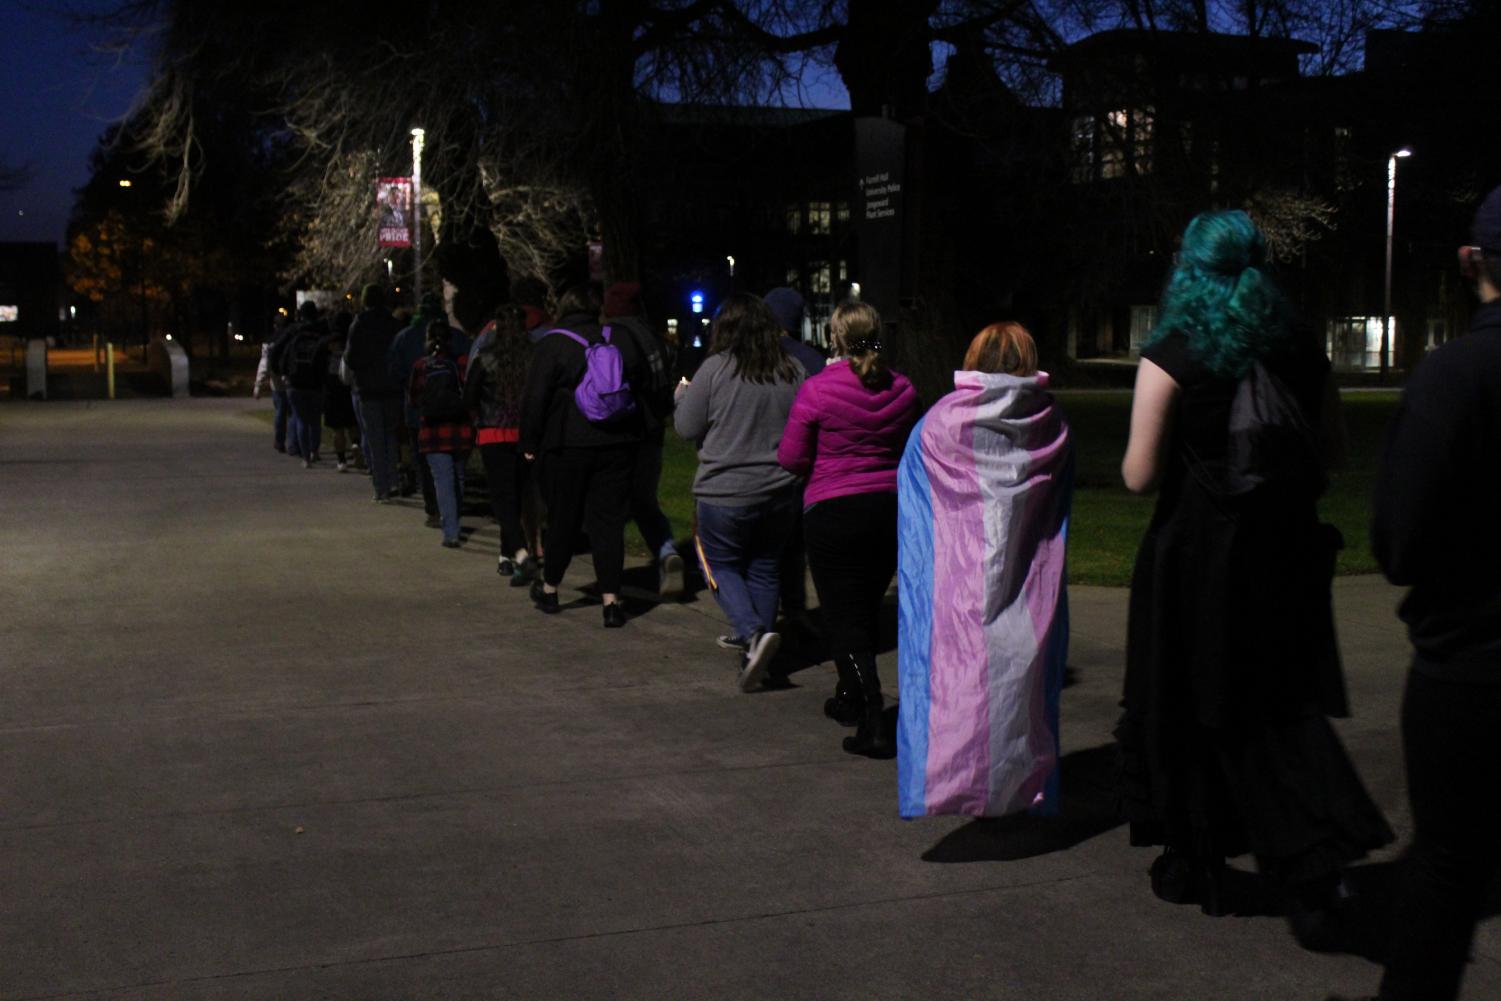 CWU+Honors+Transgender+Day+of+Remembrance